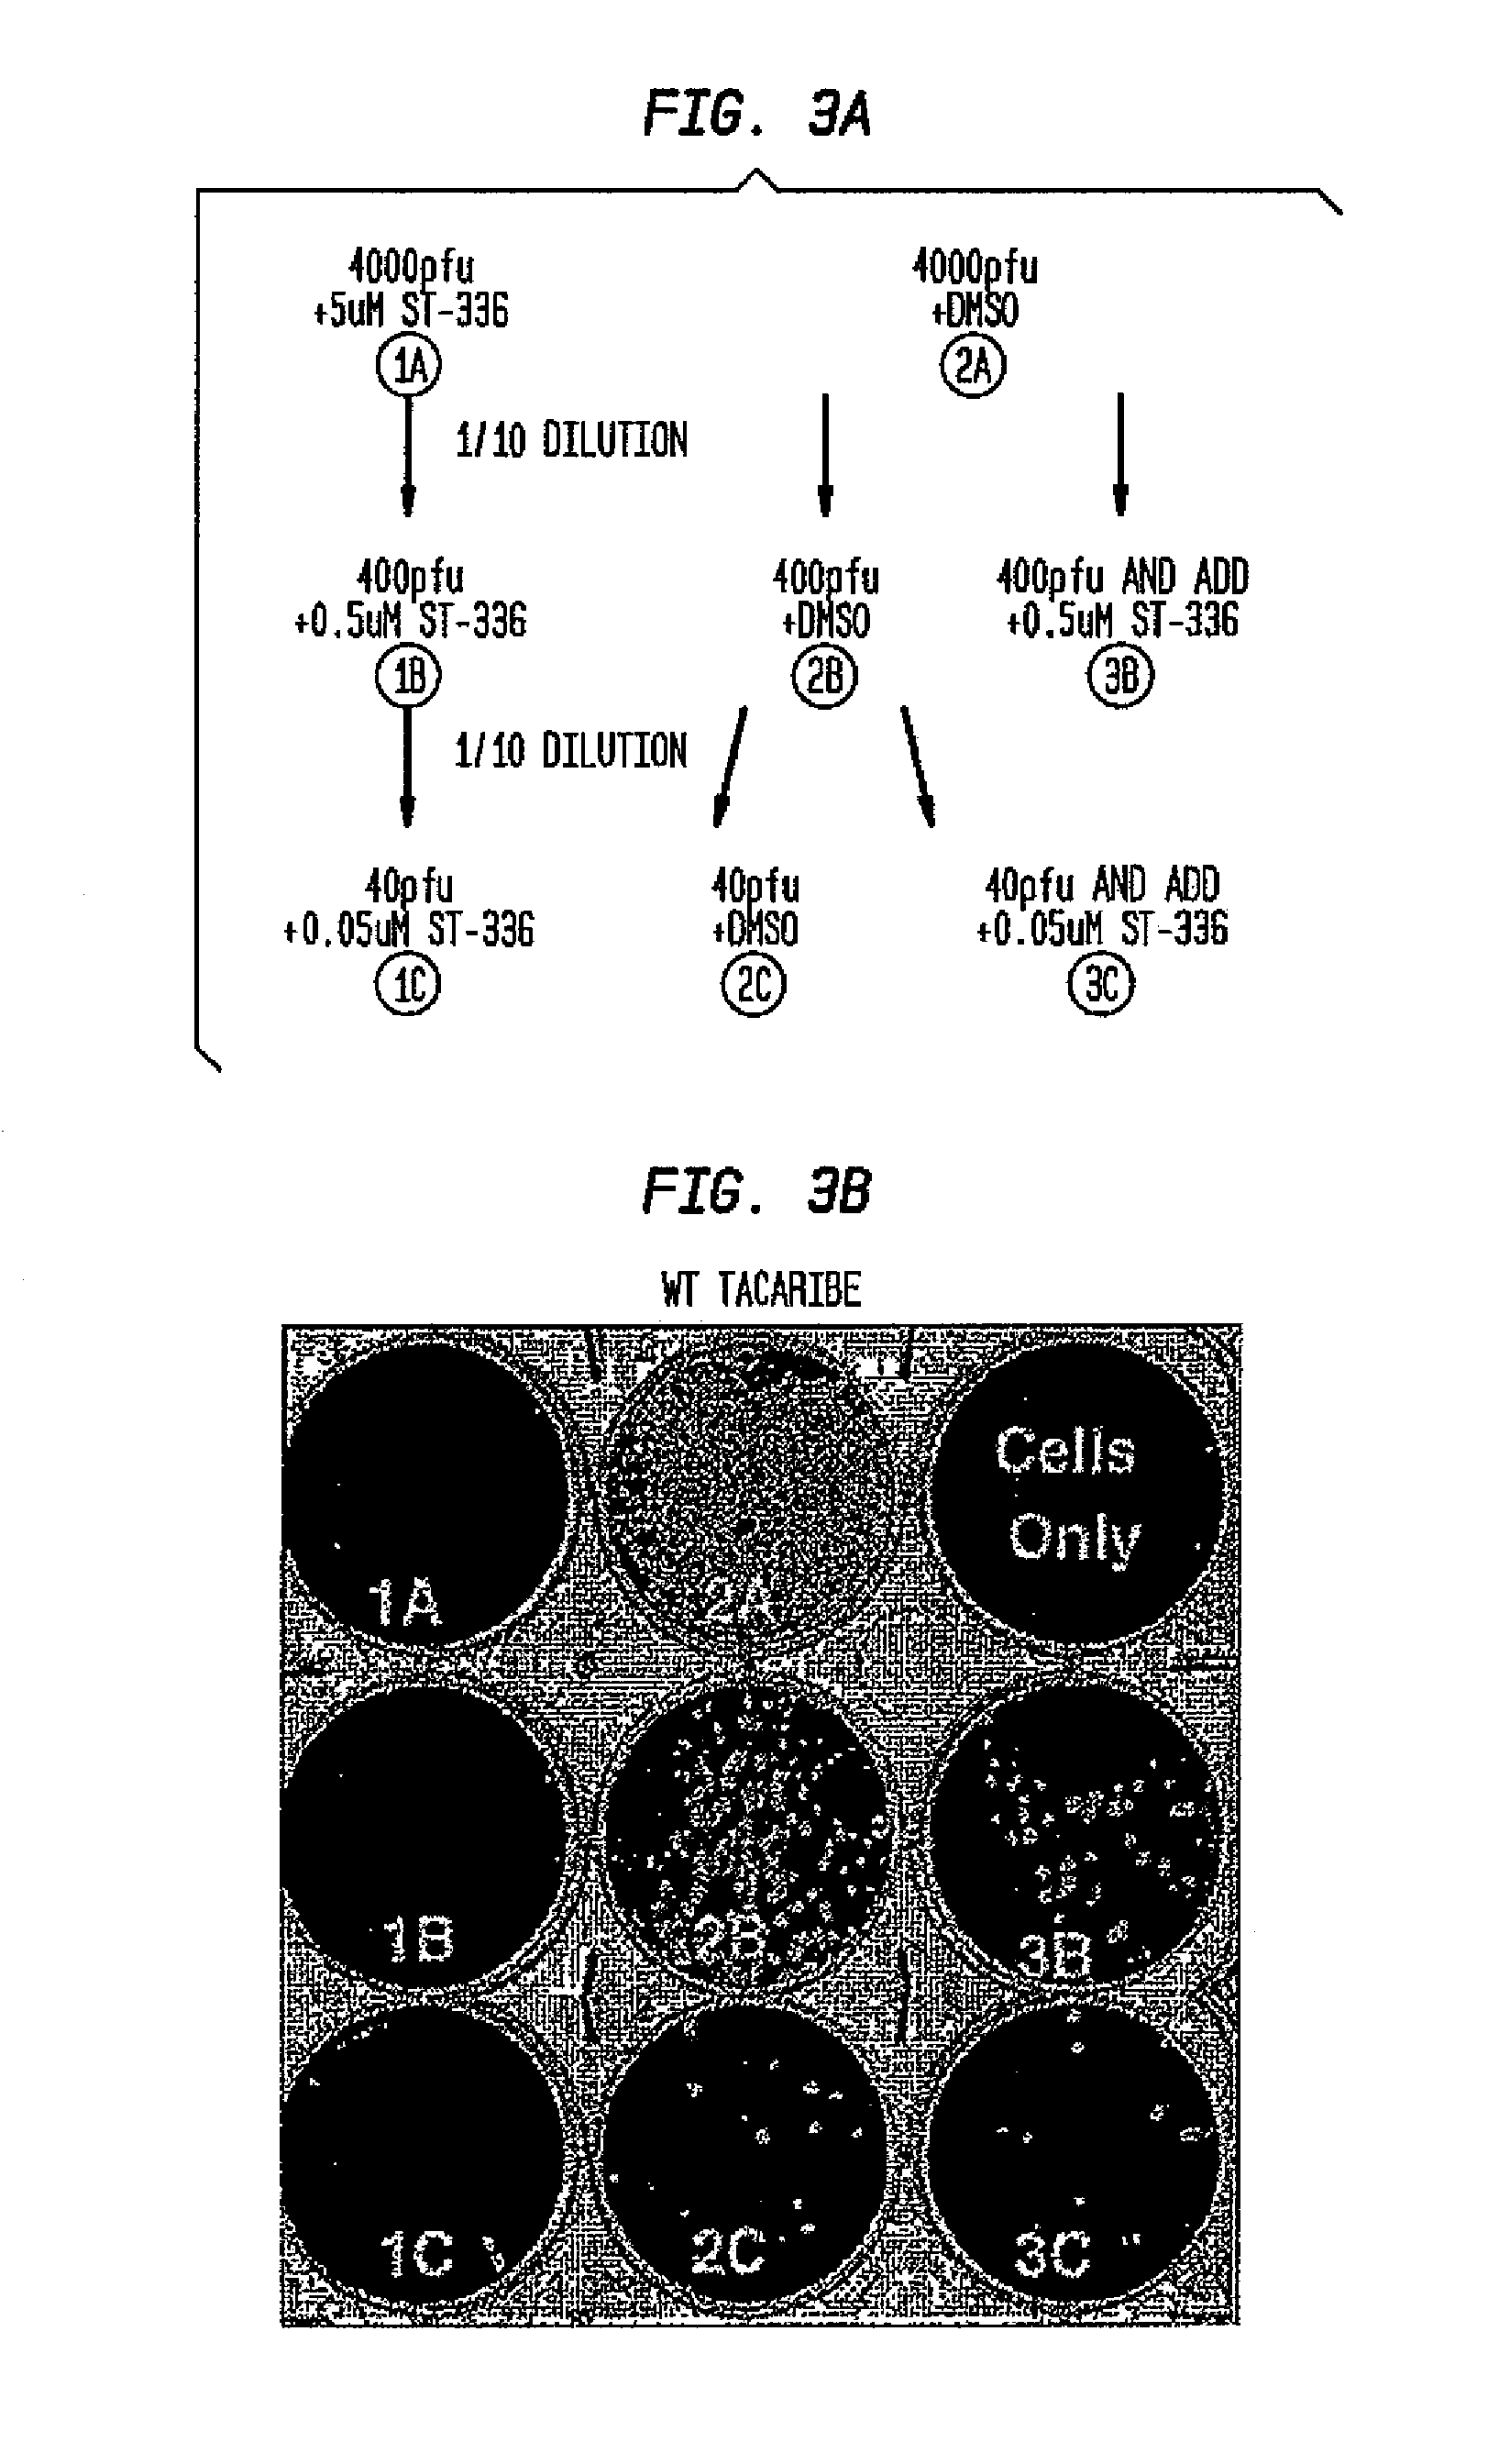 Sulfonyl semicarbazides, semicarbazides and ureas, pharmaceutical compositions thereof, and methods for treating hemorrhagic fever viruses, including infections associated with arenaviruses